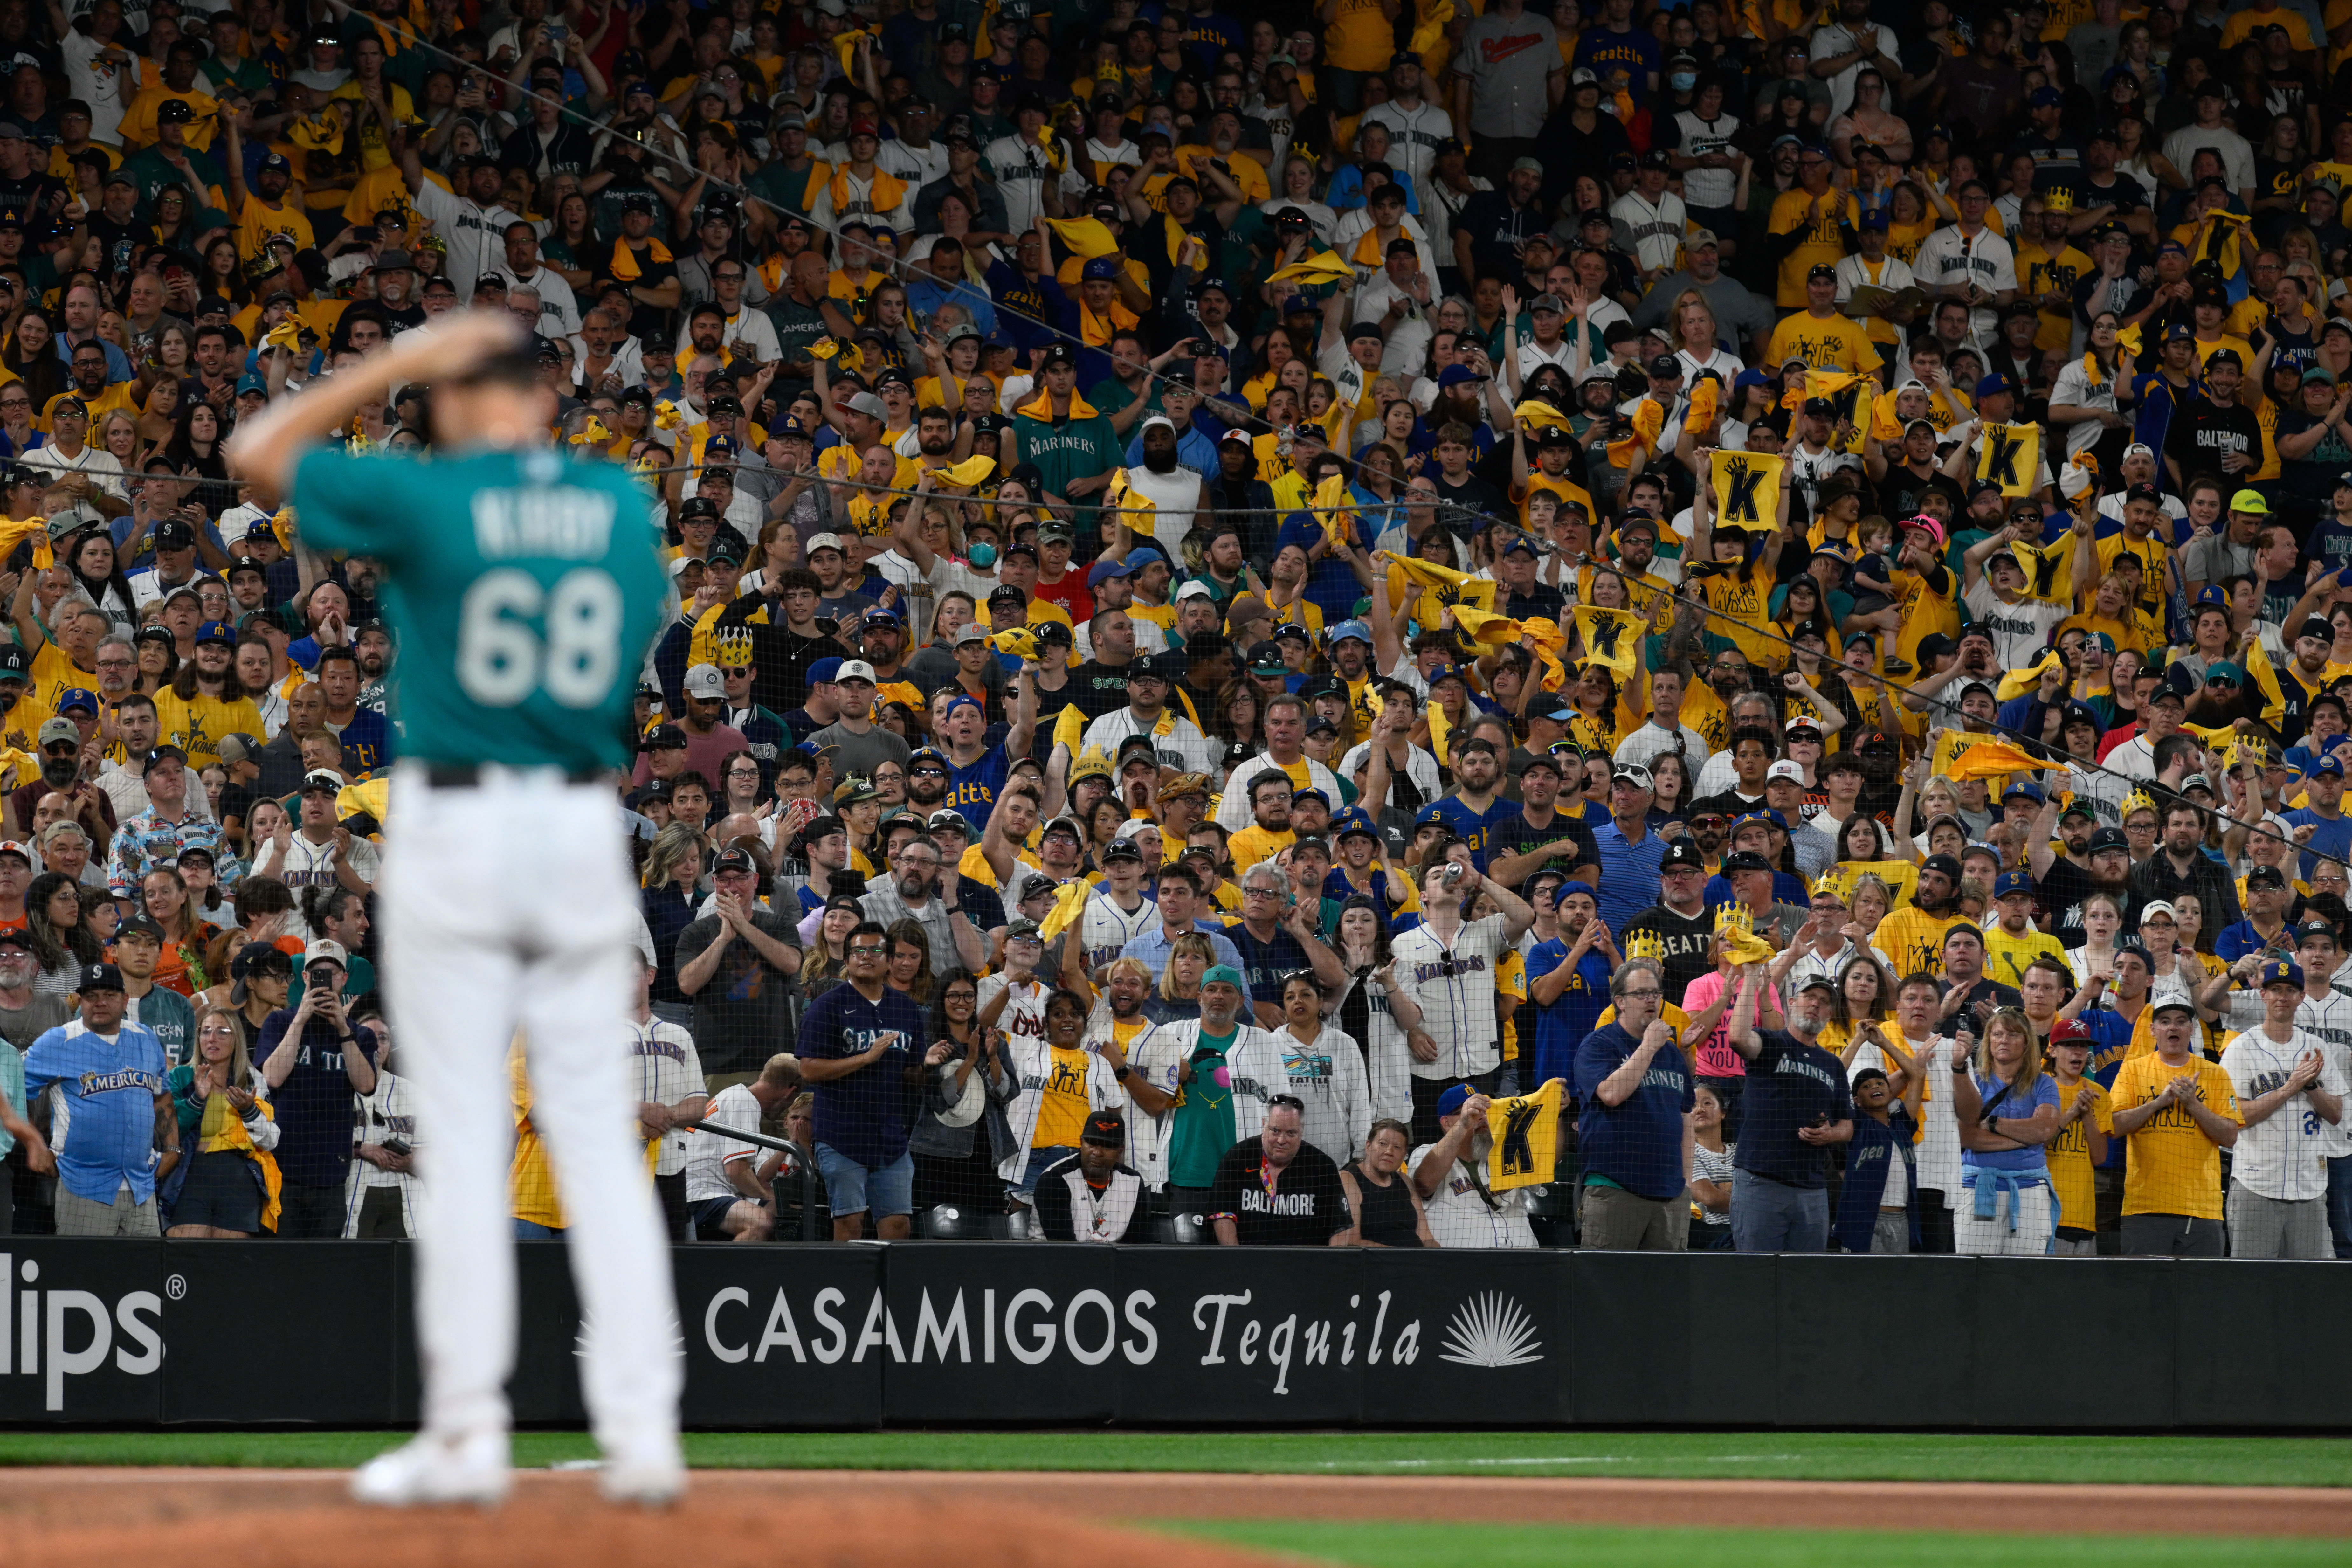 Mariners open Félix Weekend with a bang, win big over Orioles 9-2